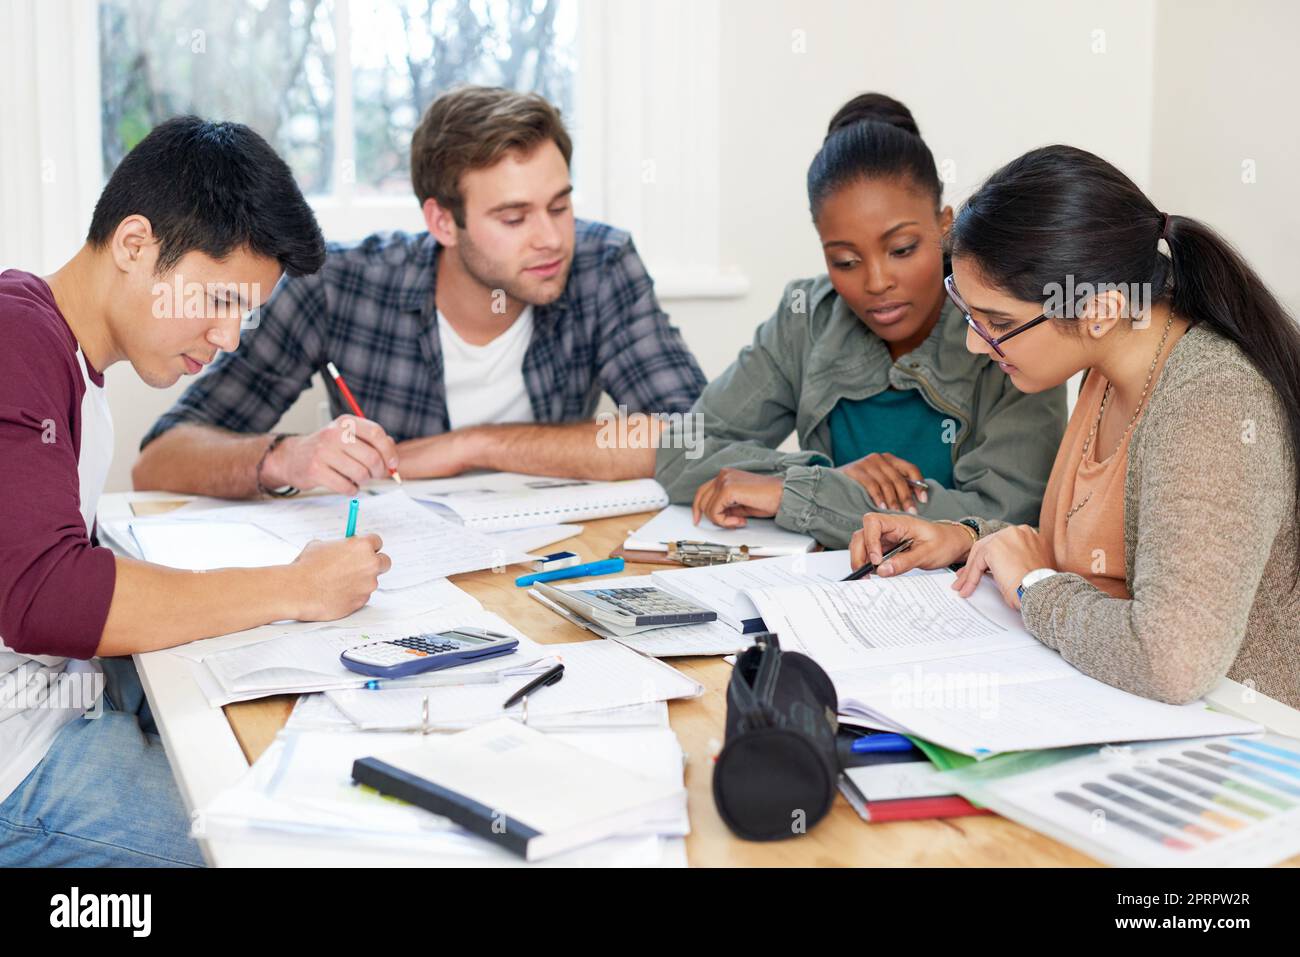 Helping each other through finals revision. a group of university students in a study group. Stock Photo